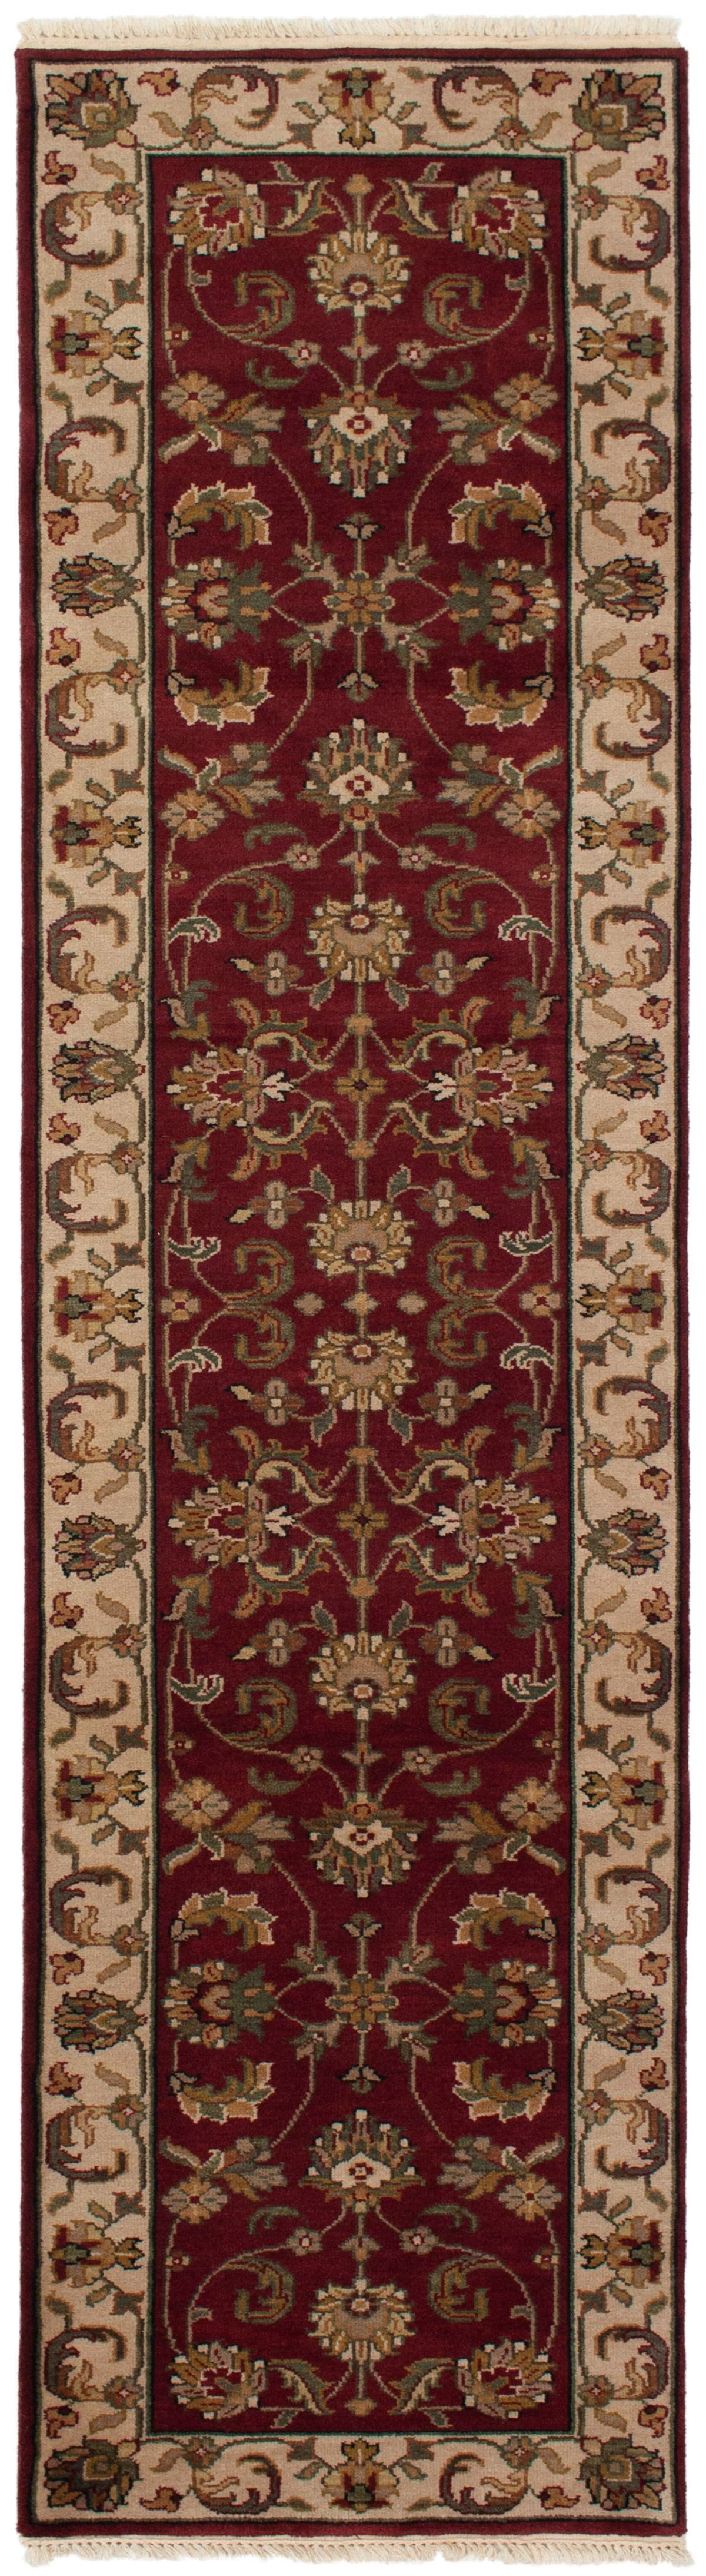 Hand-knotted Sultanabad Dark Red Wool Rug 2'6" x 10'1" Size: 2'6" x 10'1"  